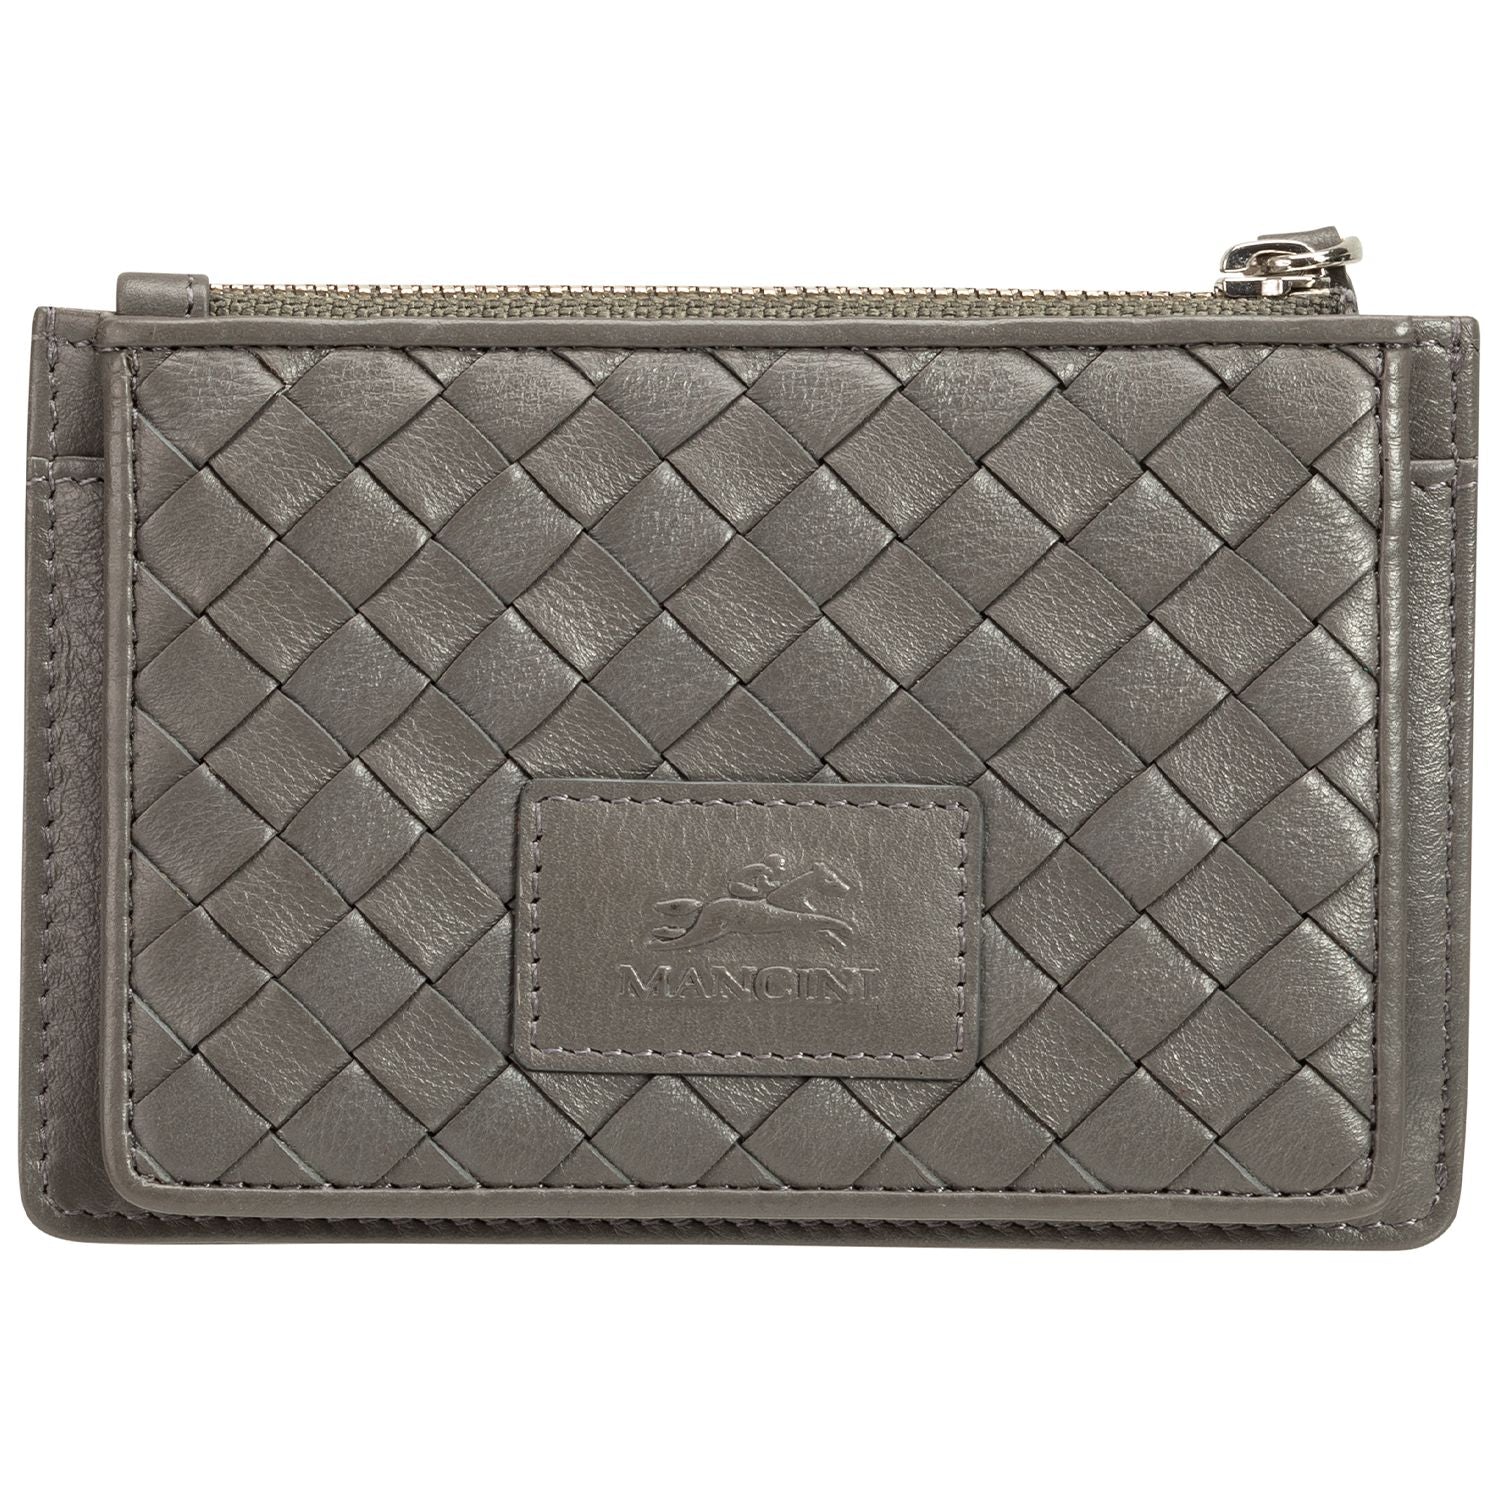 Mancini BASKET WEAVE RFID Secure Card Case and Coin Pocket - Grey